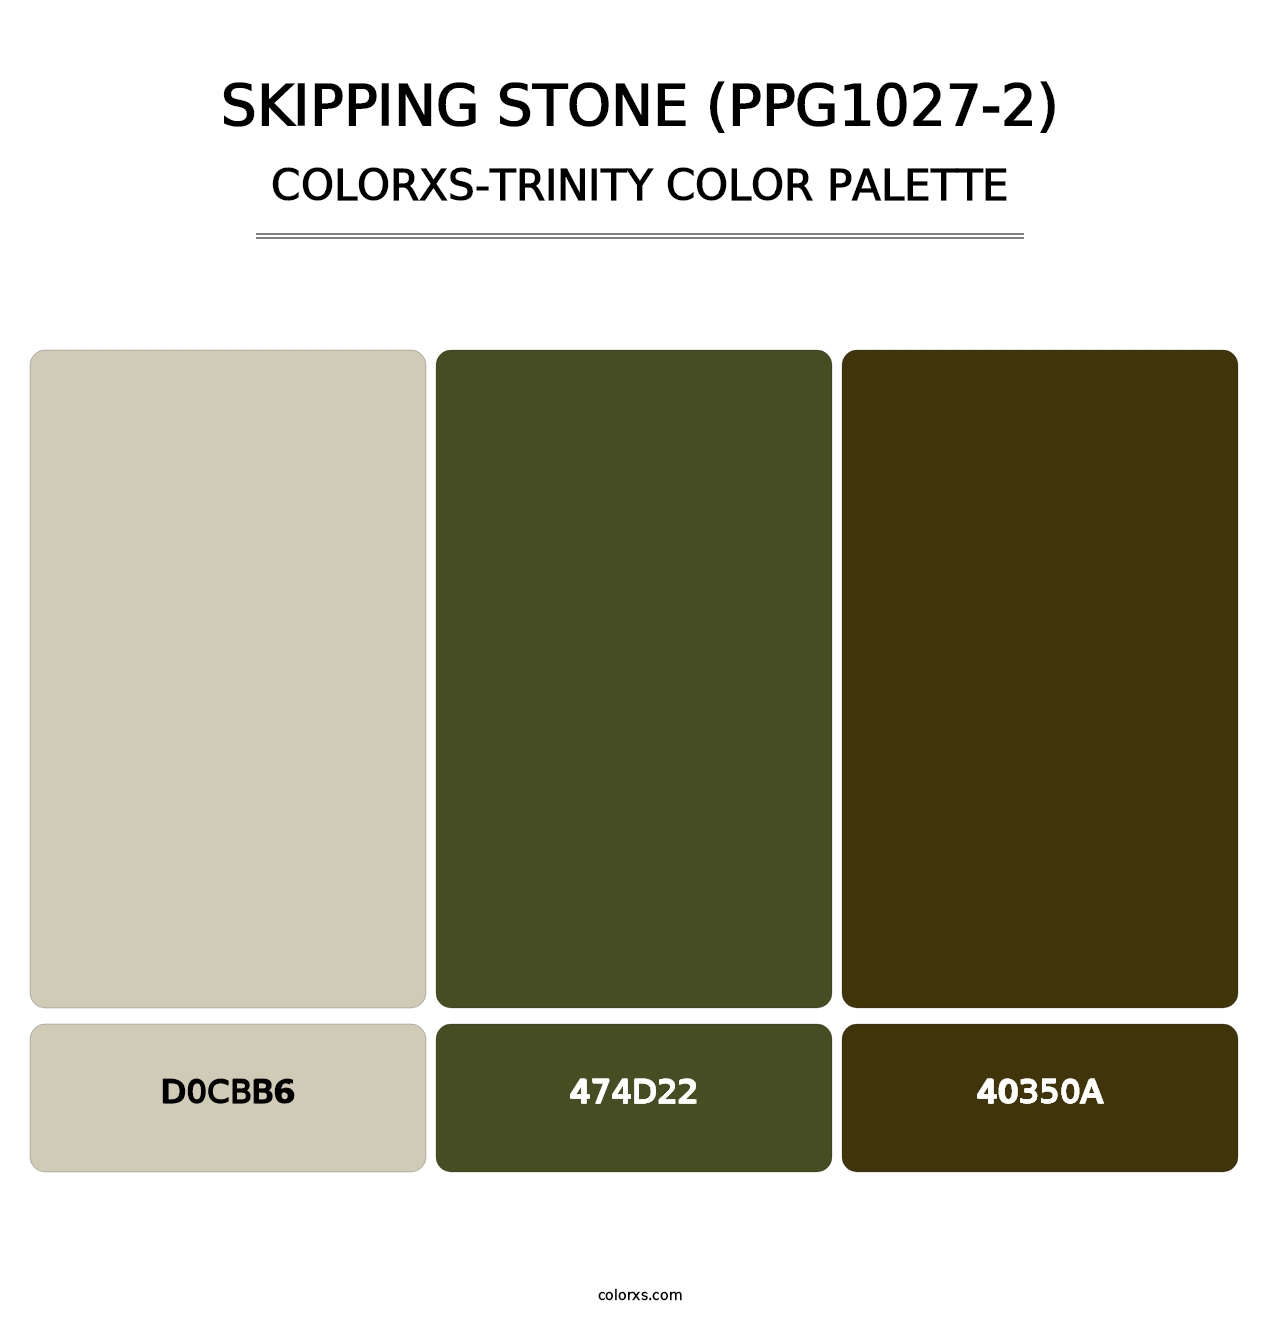 Skipping Stone (PPG1027-2) - Colorxs Trinity Palette